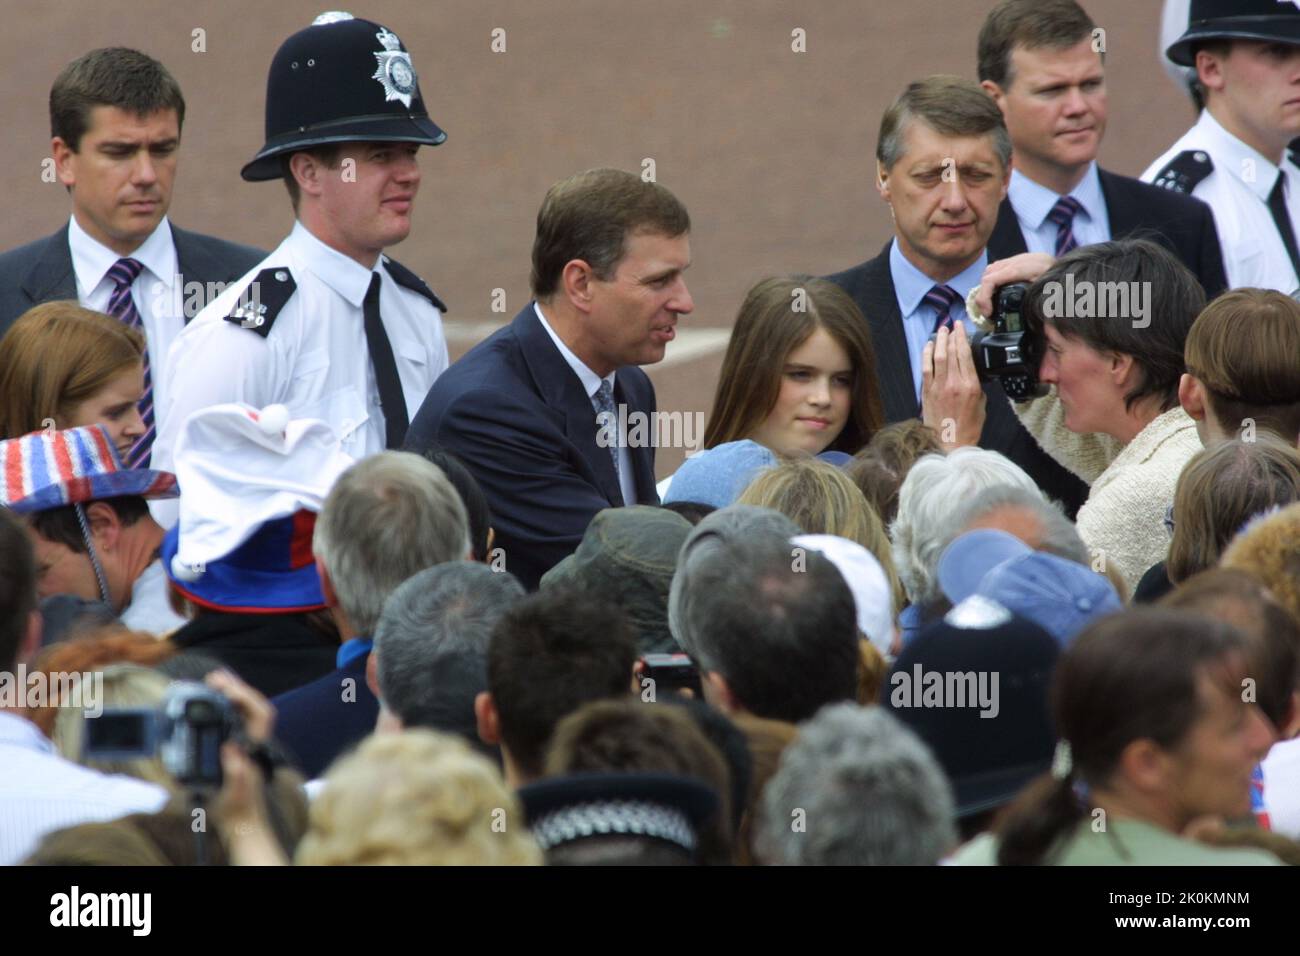 4th June 2002 - Prince Andrew and Princess Eugenie meeting the public at Golden Jubilee of Queen Elizabeth II in The Mall in London Stock Photo